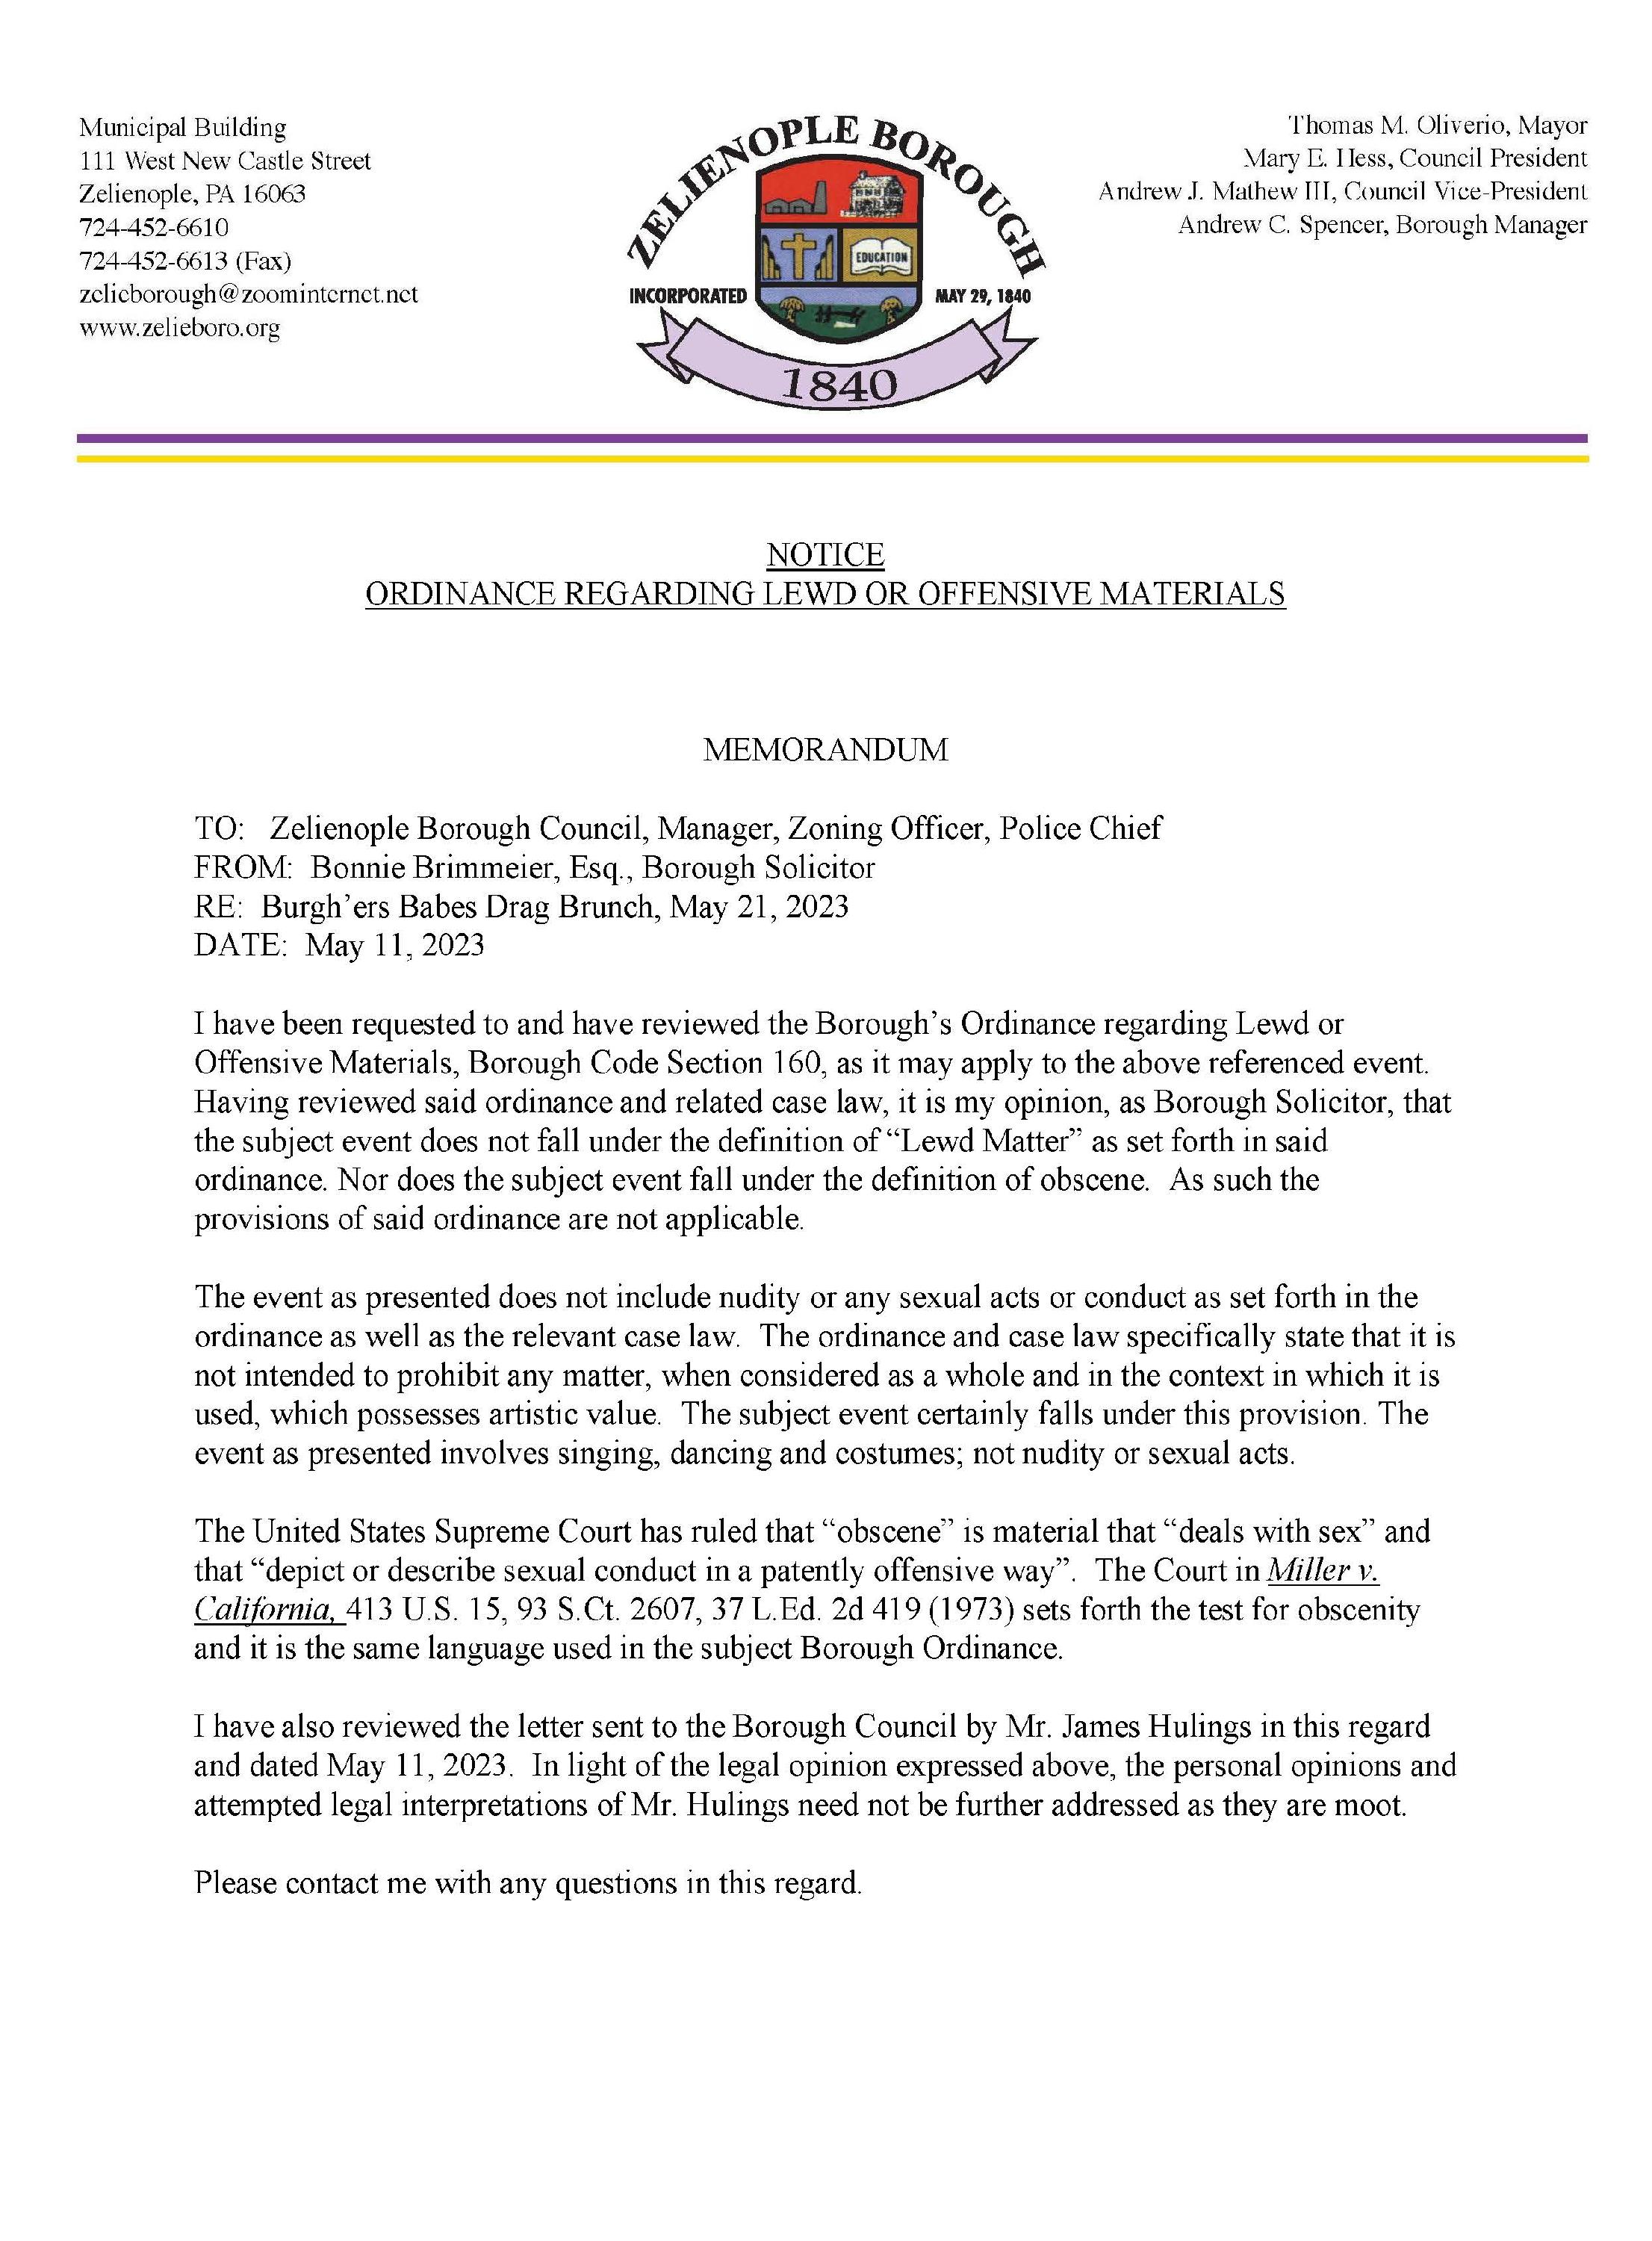 Notice - Ordinance on Lewd or Offensive Material